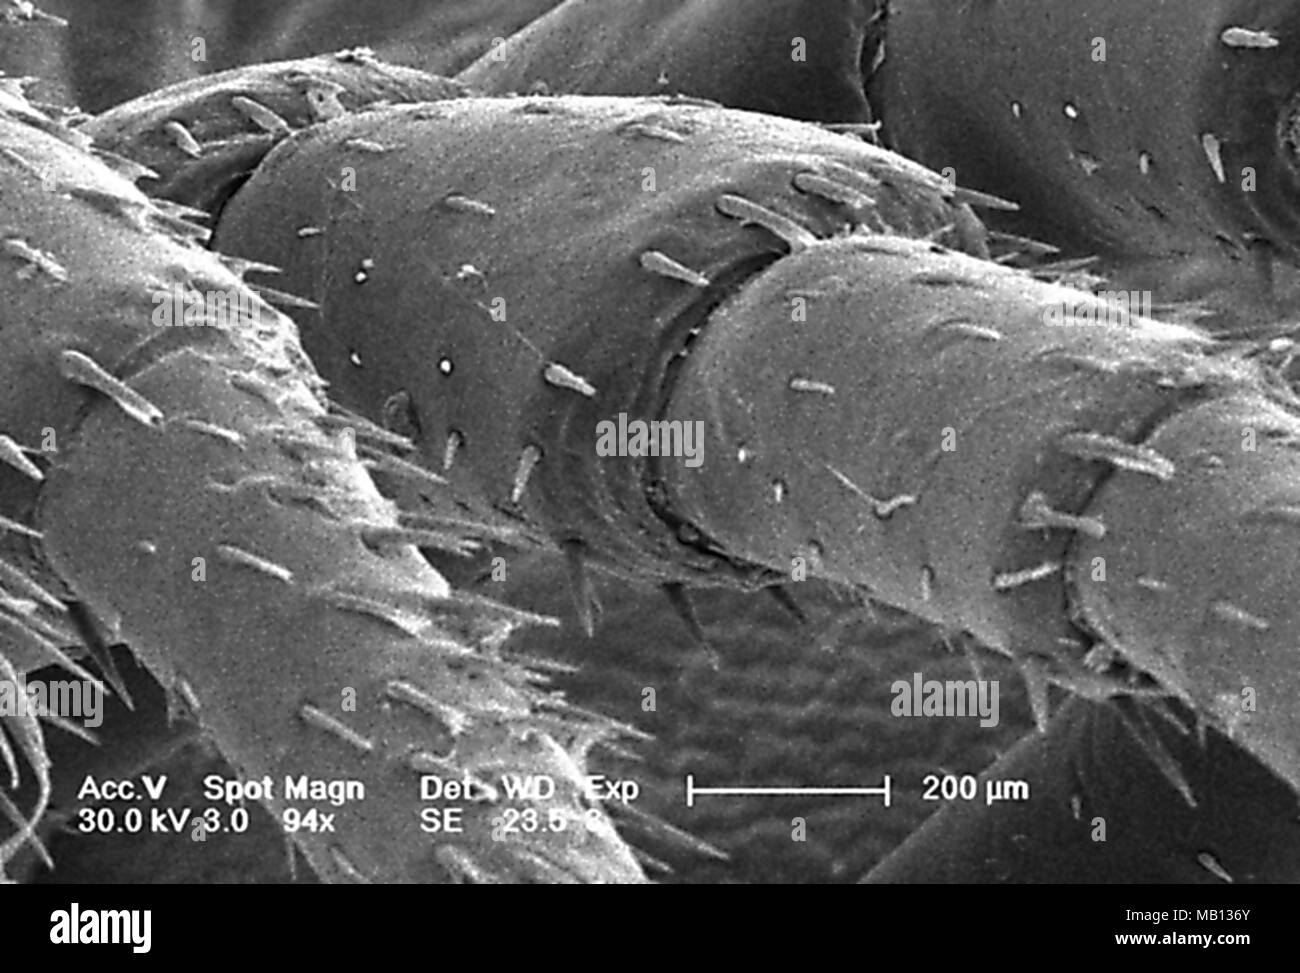 Trunk region leg segments of an unidentified millipede found in Decatur, Georgia, revealed in the 94x magnified scanning electron microscopic (SEM) image, 2005. Image courtesy Centers for Disease Control (CDC) / Janice Haney Carr. () Stock Photo